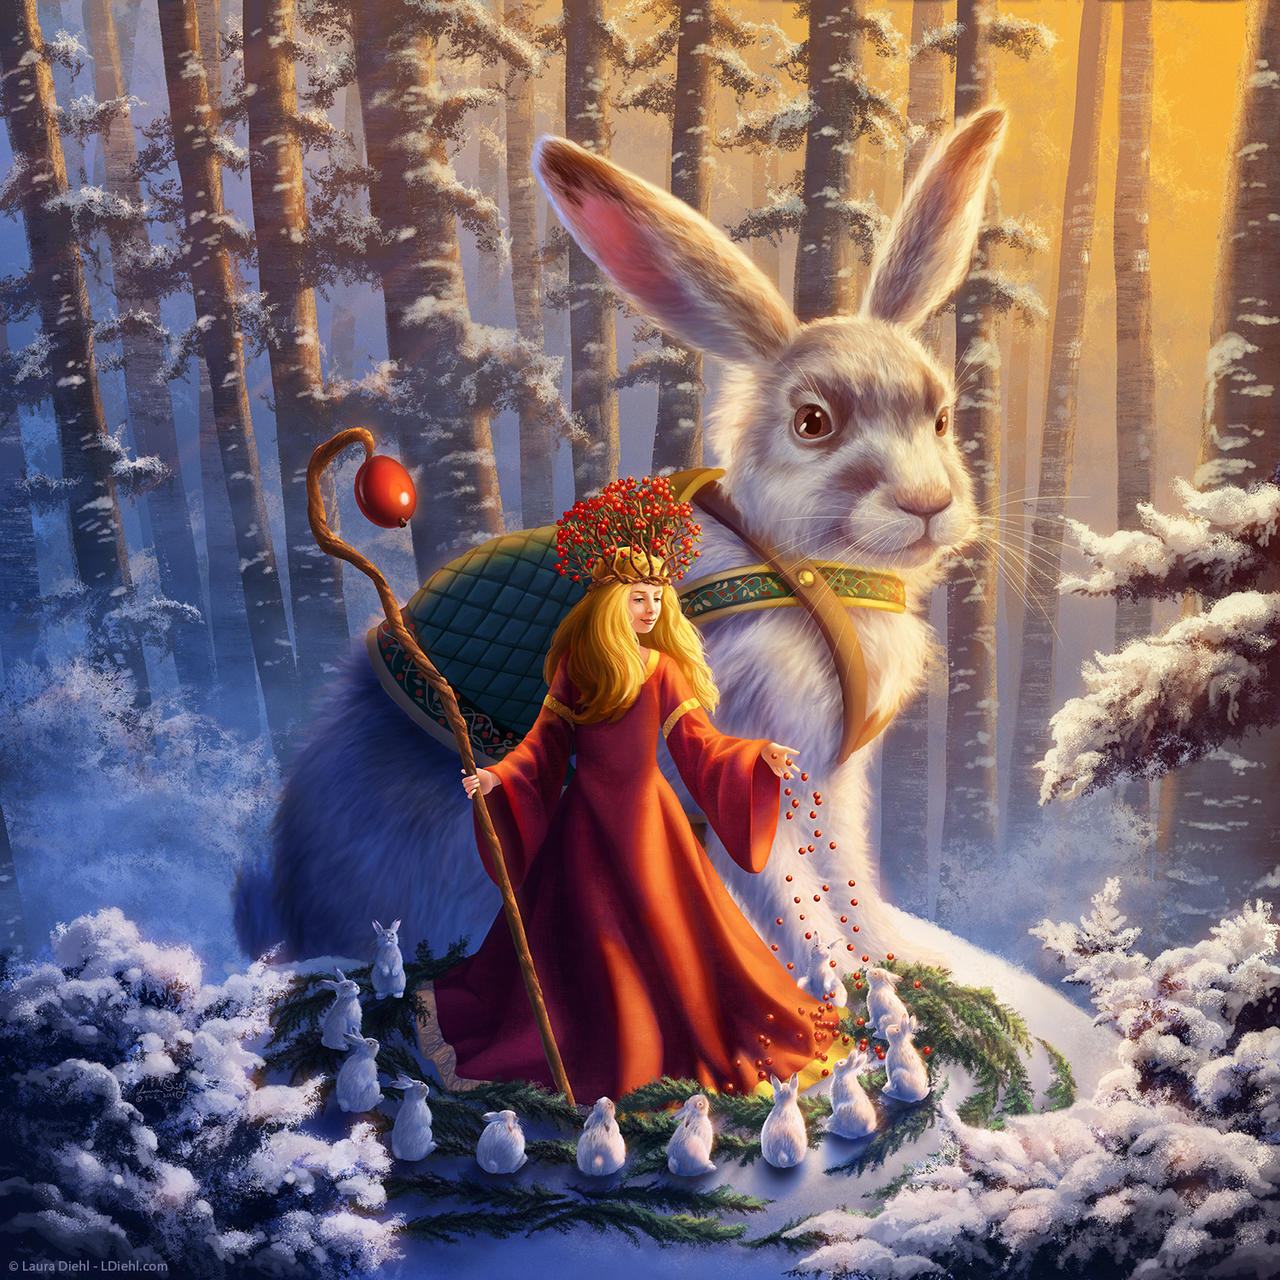 Snowberry and Hare